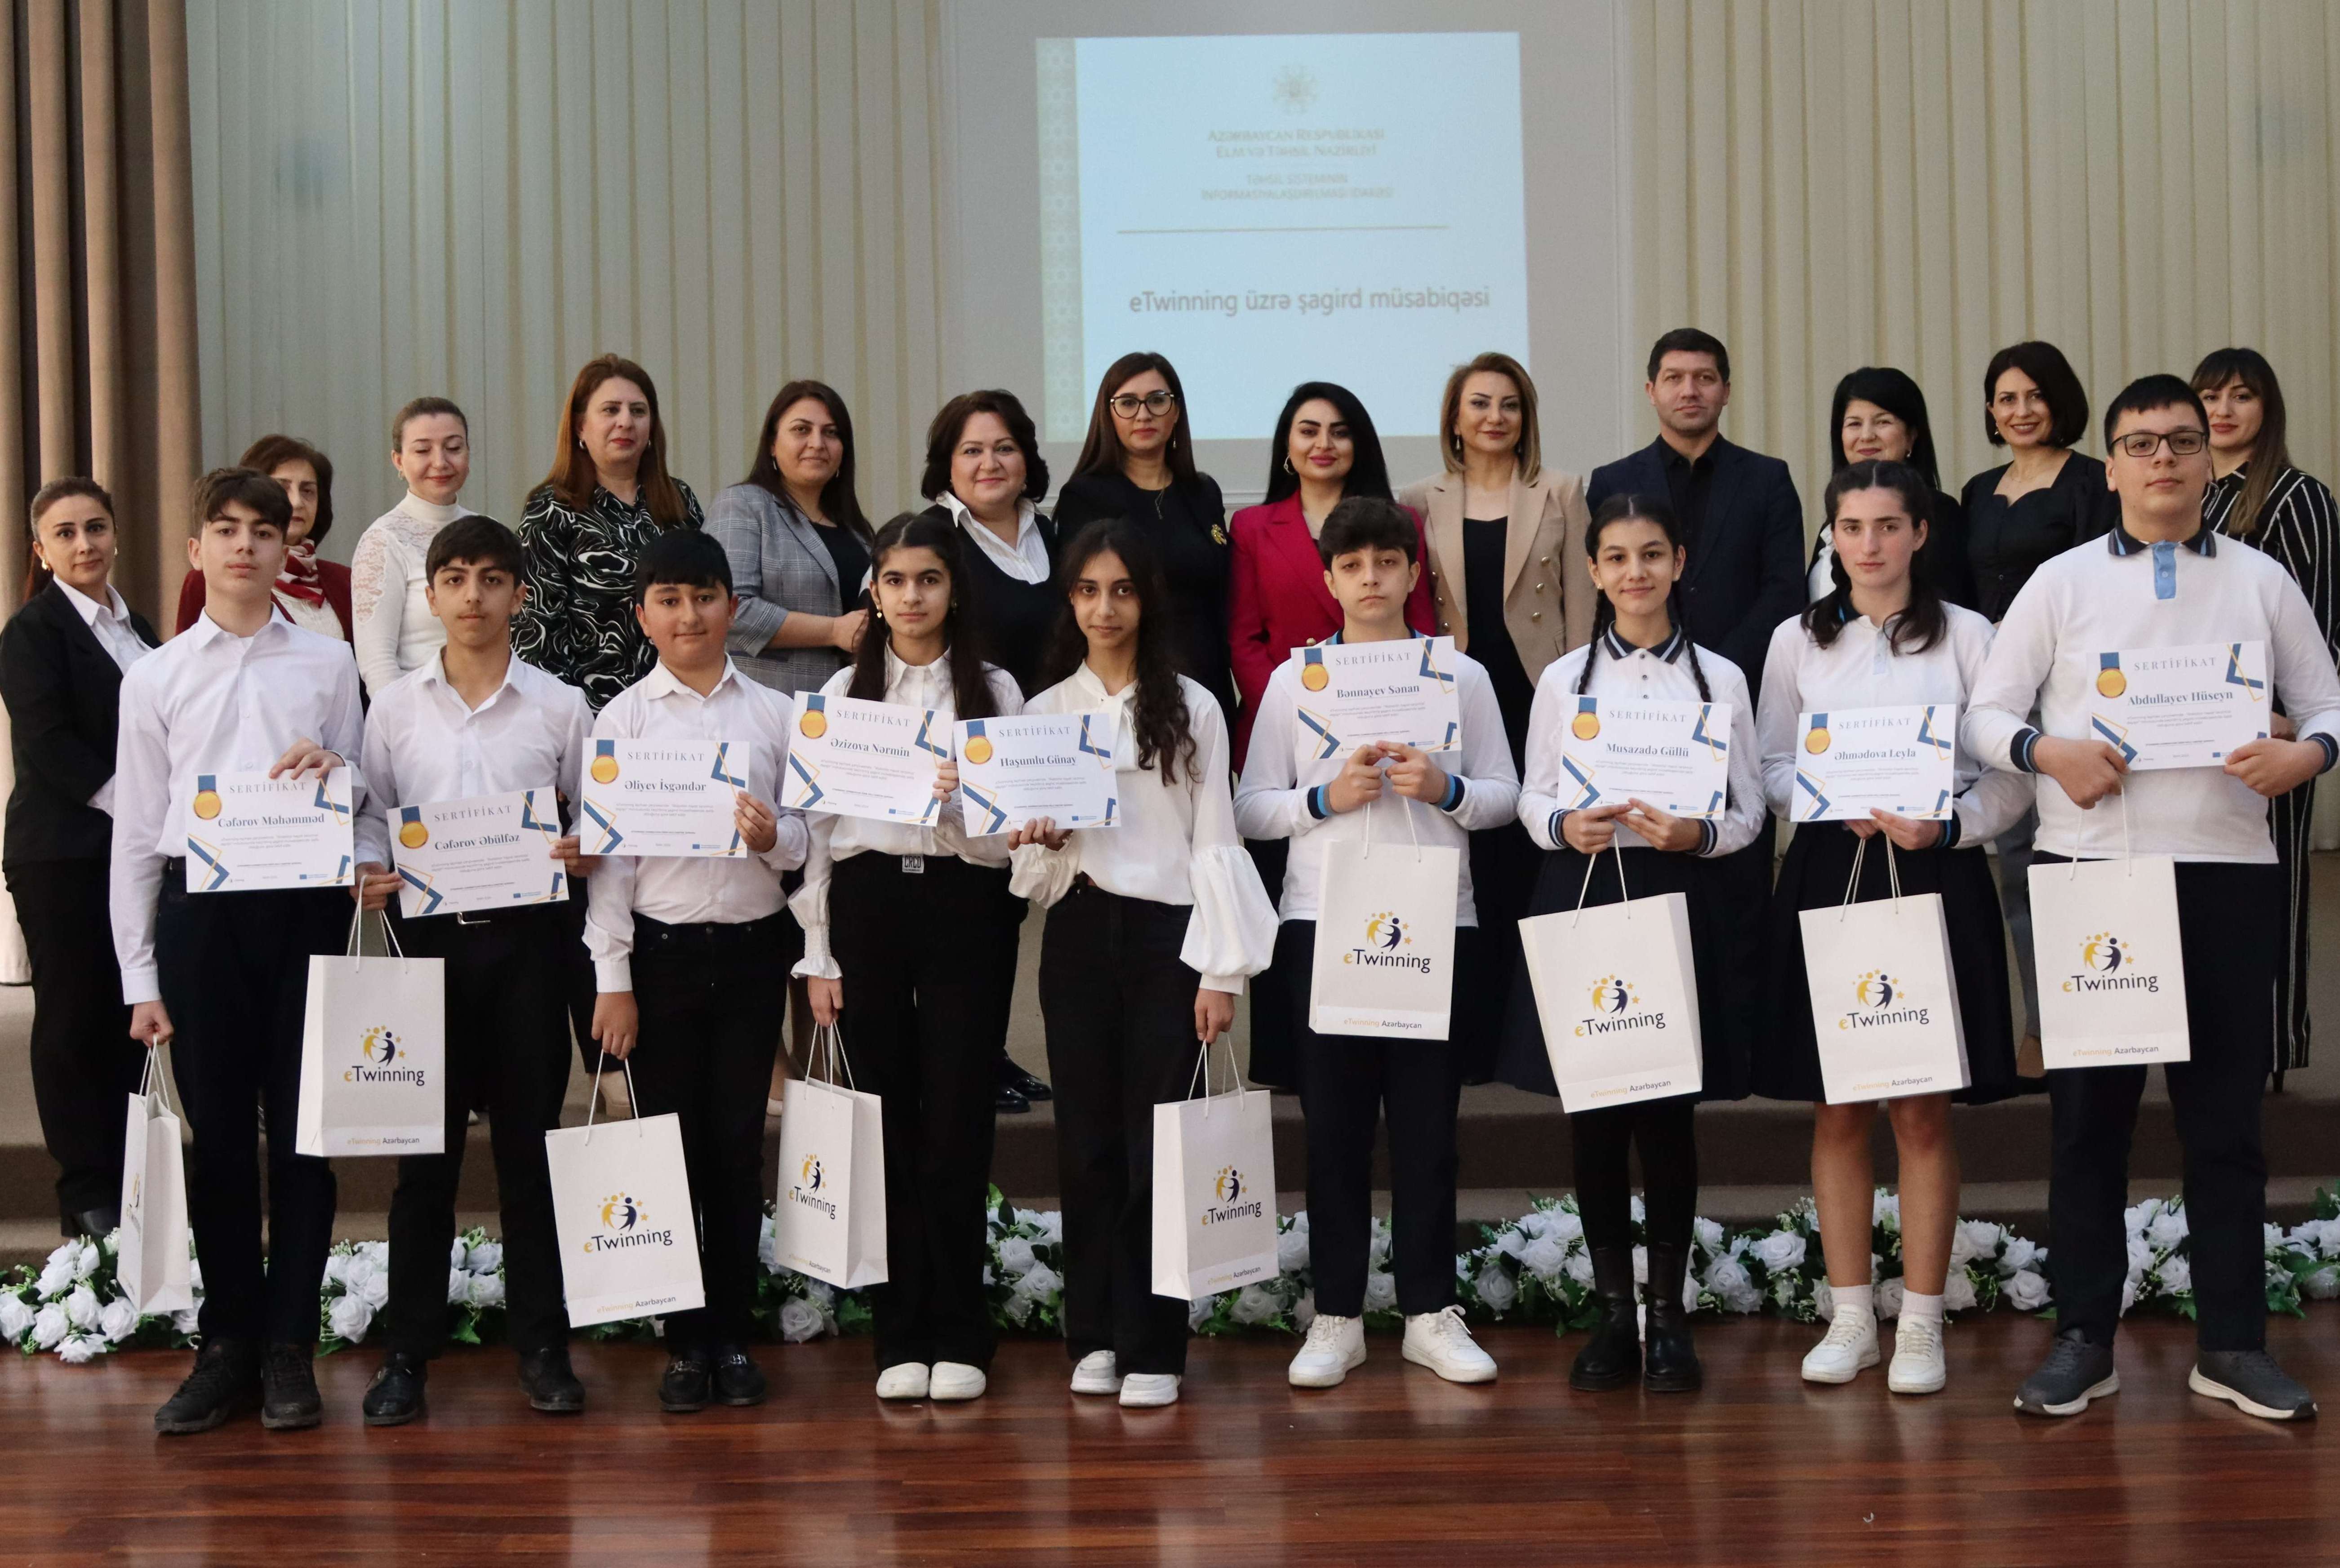 The debate stage of the student competition on eTwinning was held